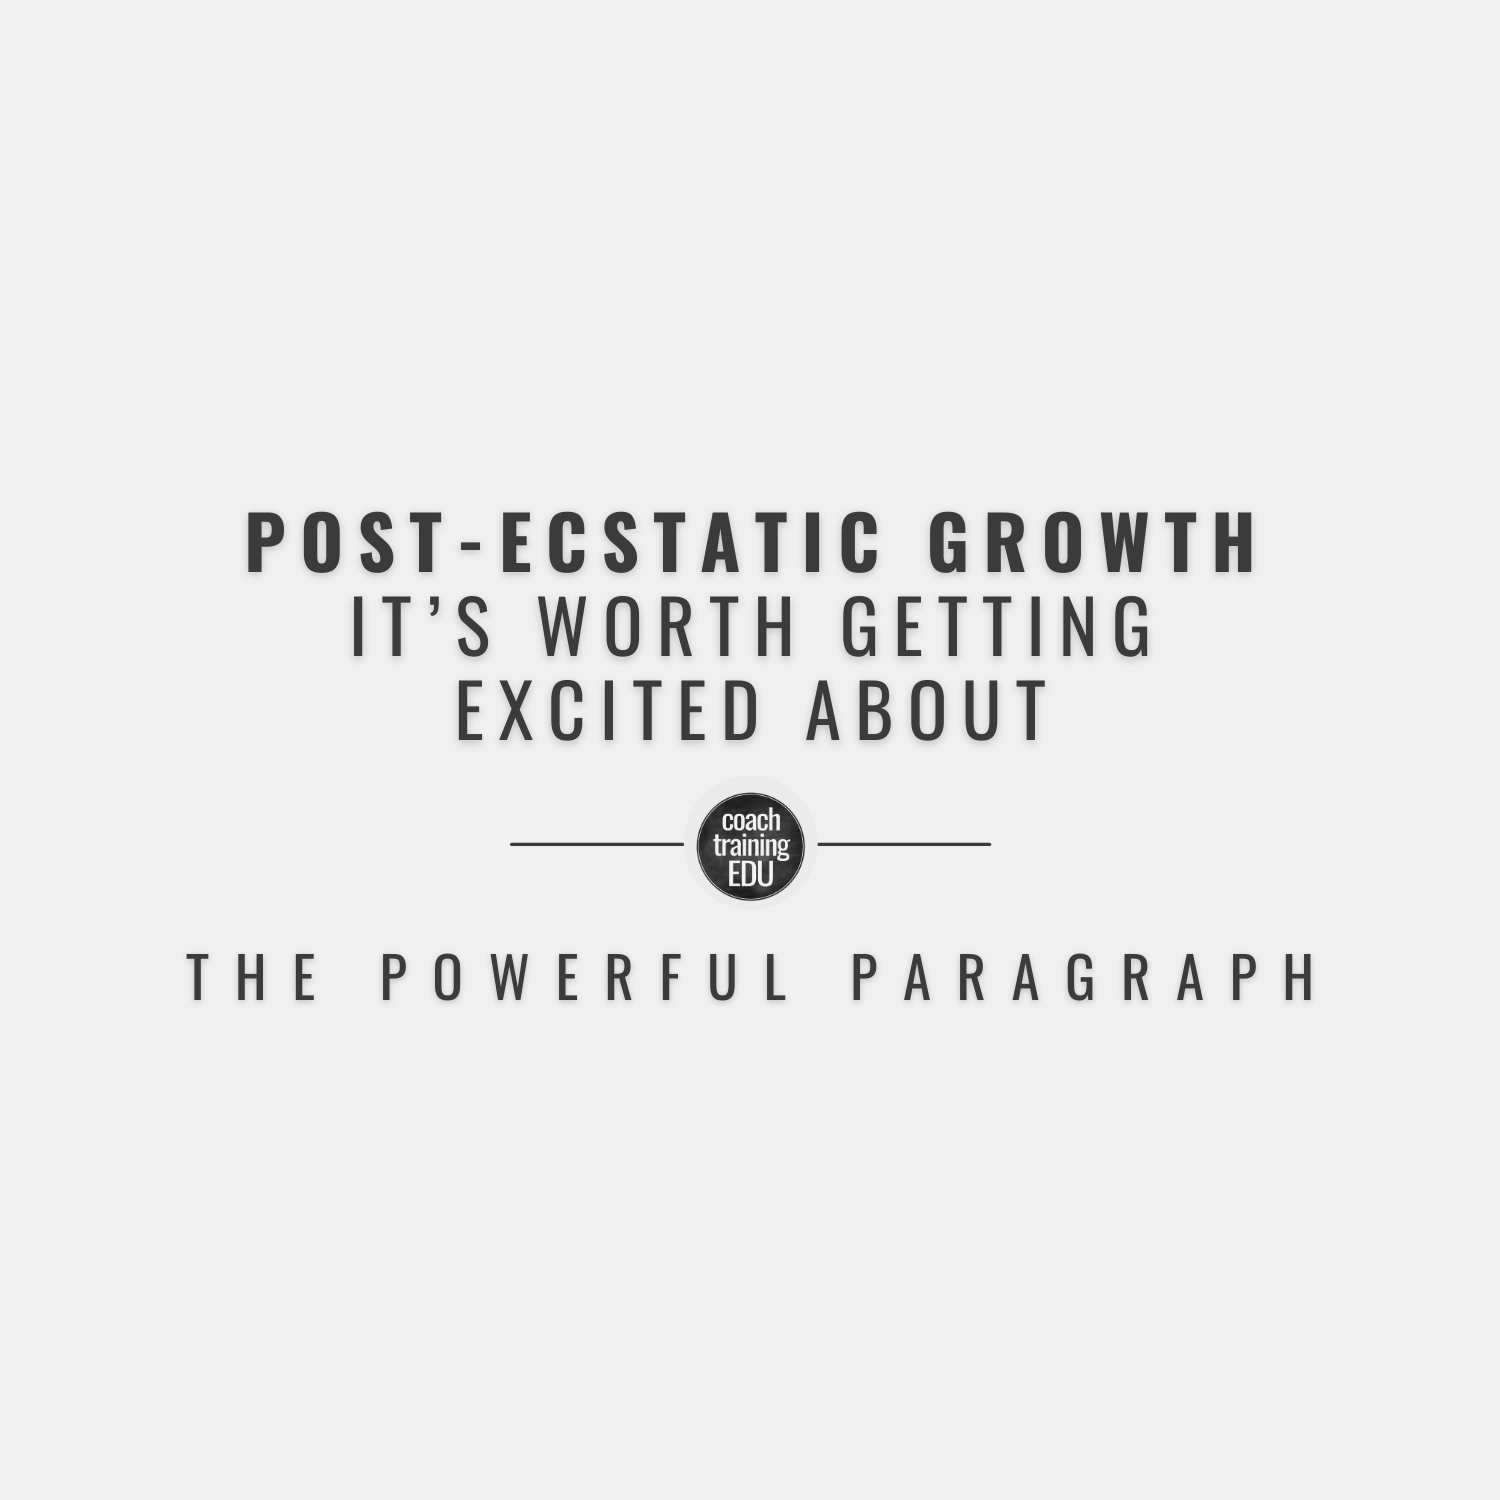 Post-ecstatic Growth – It’s Worth Getting Excited About